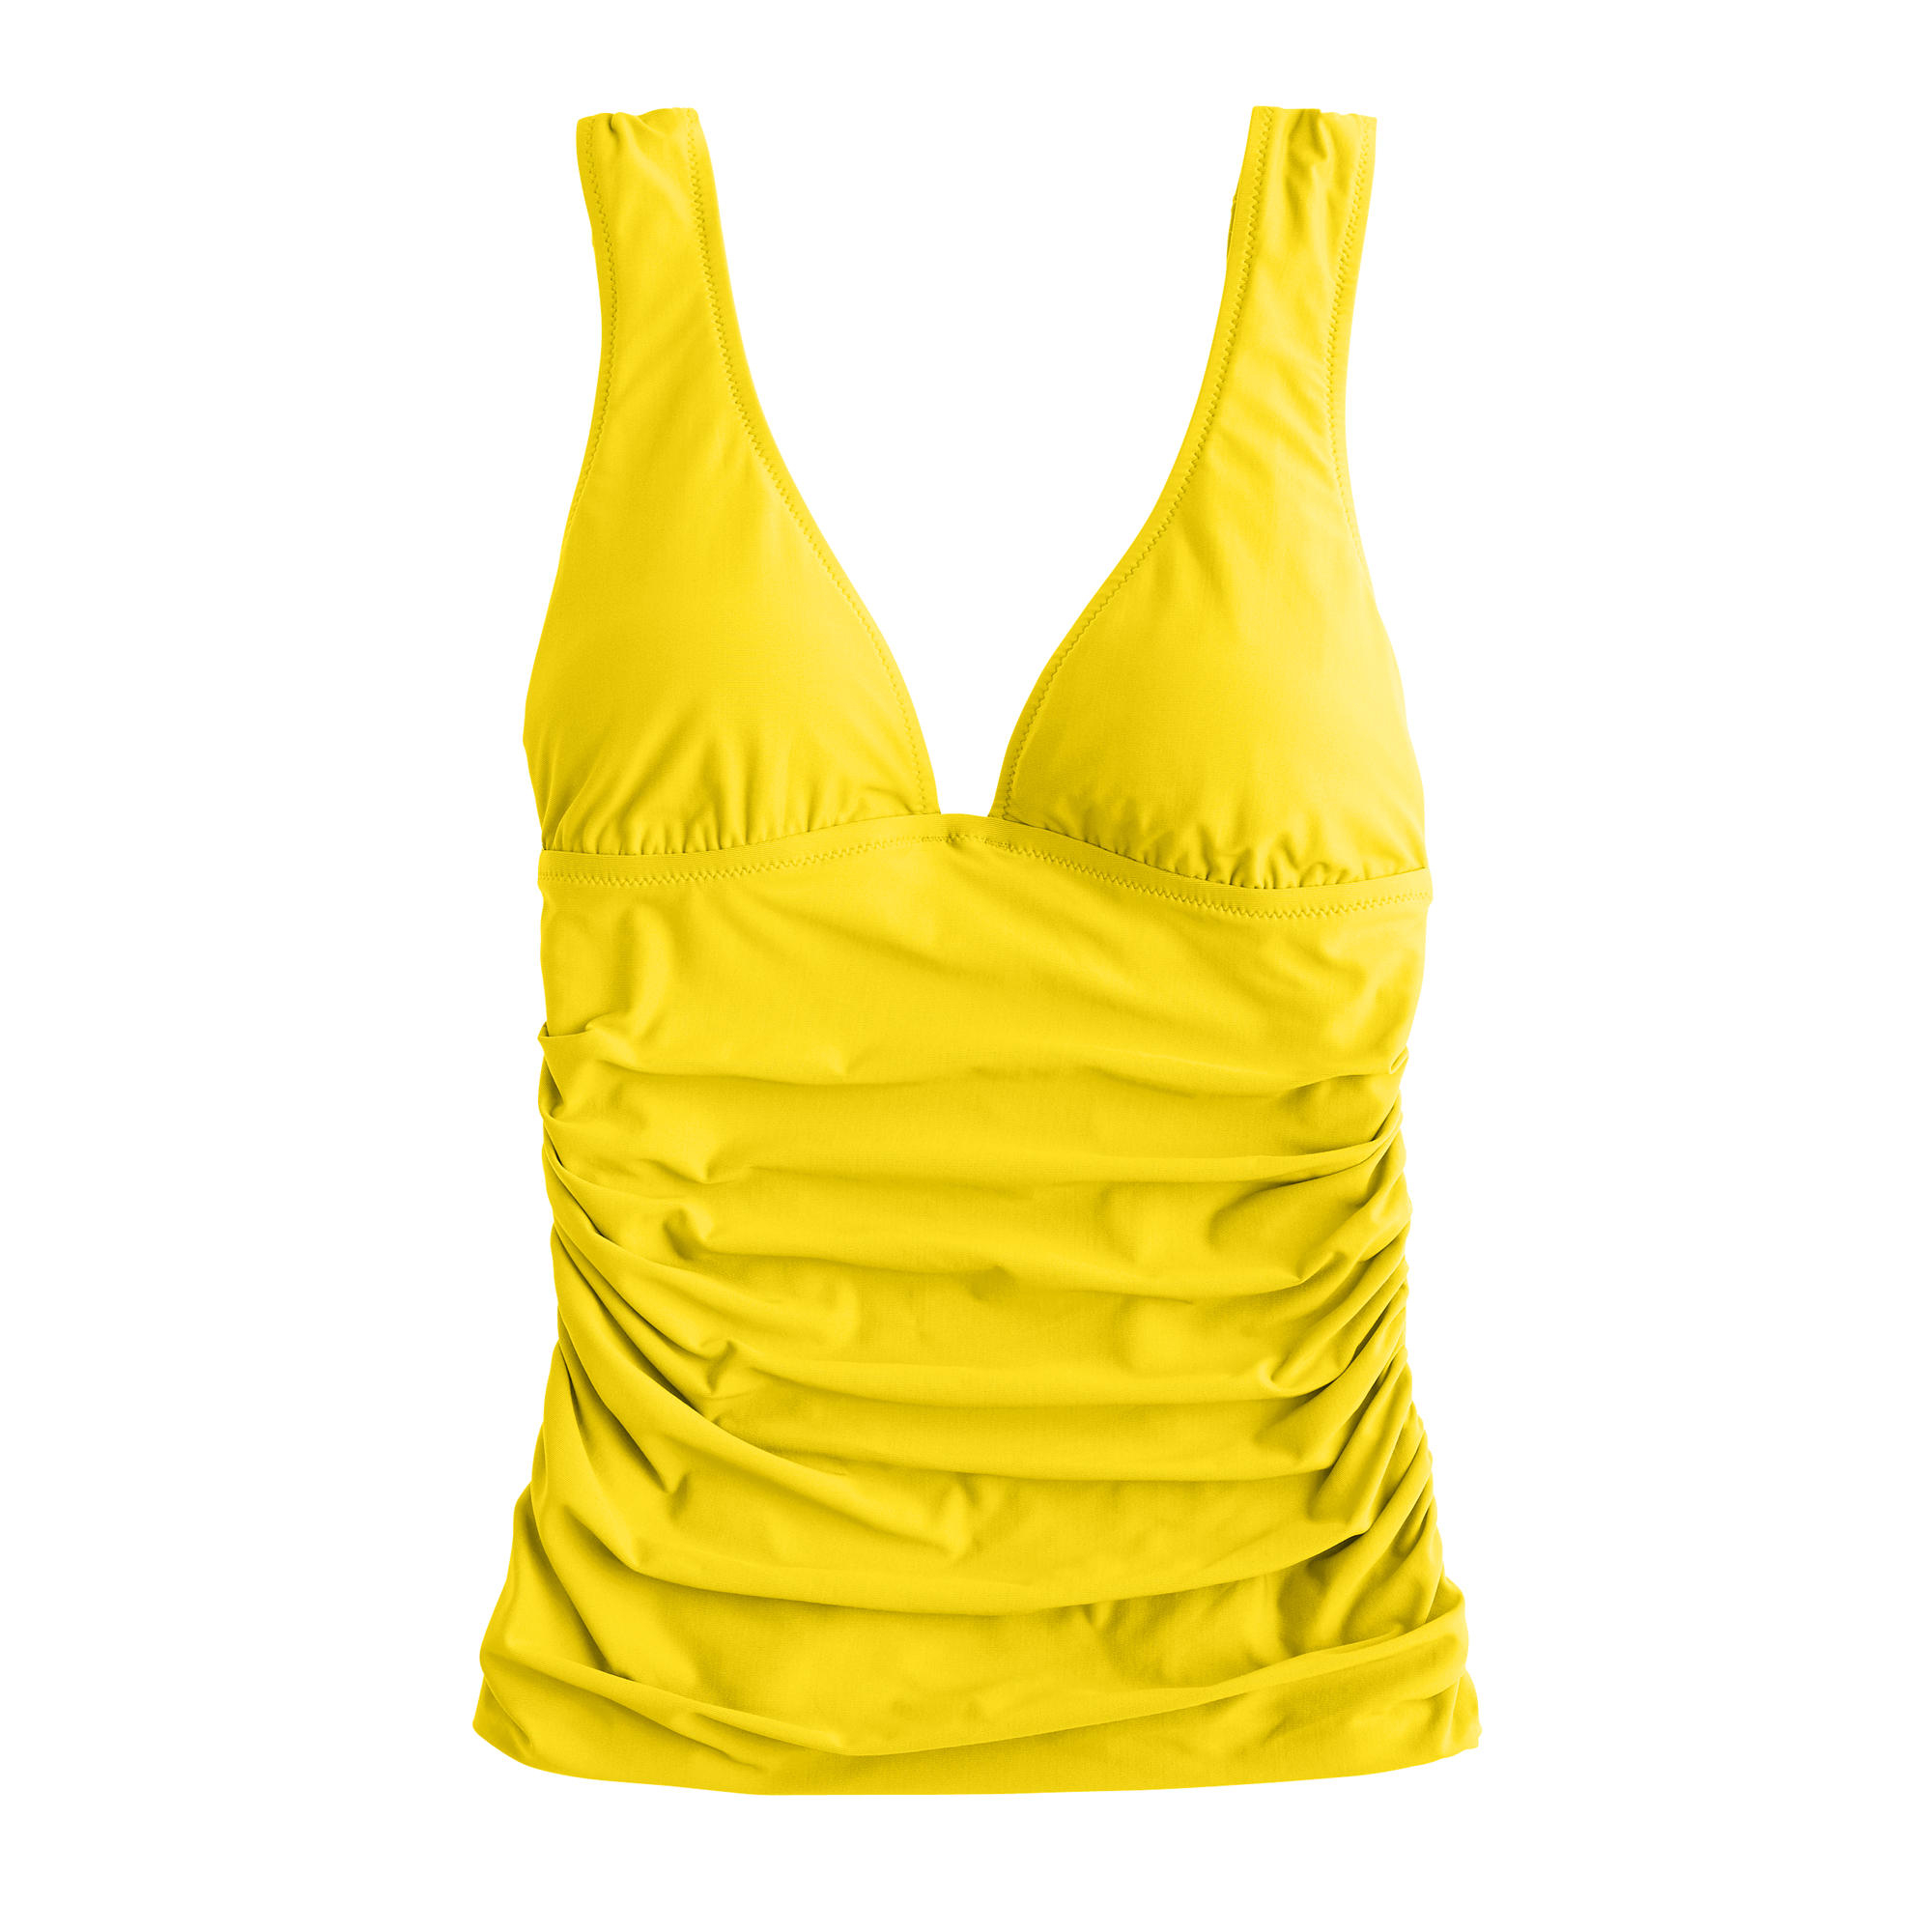 Jcrew Crisp Yellow Ruched Tankini Top Yellow Product 0 696900472 Normal 